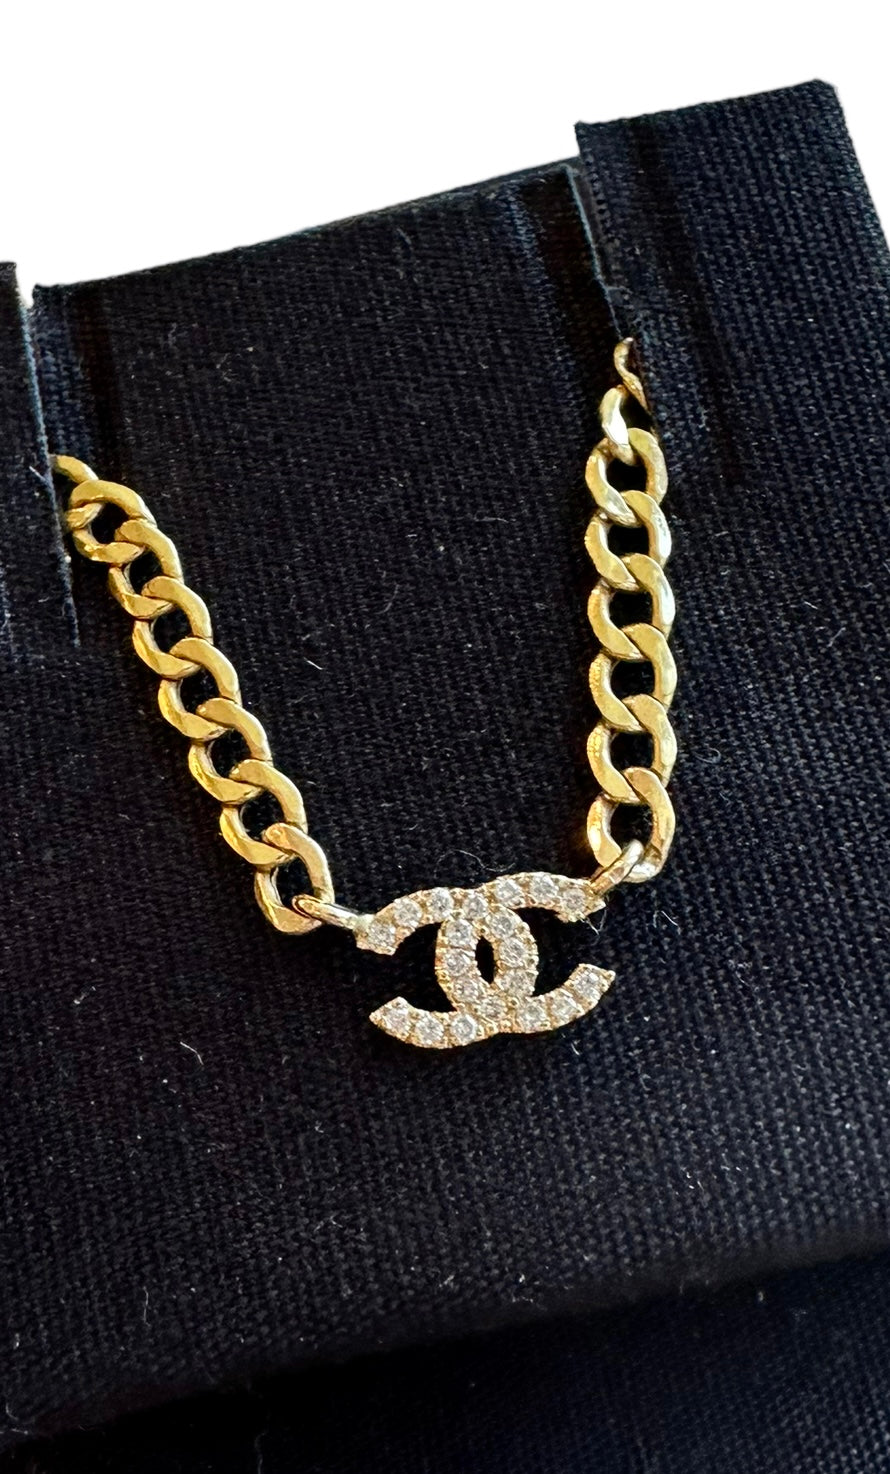 JW Collection  Jewelry  Chanel Inspired Elegant Necklace  Poshmark